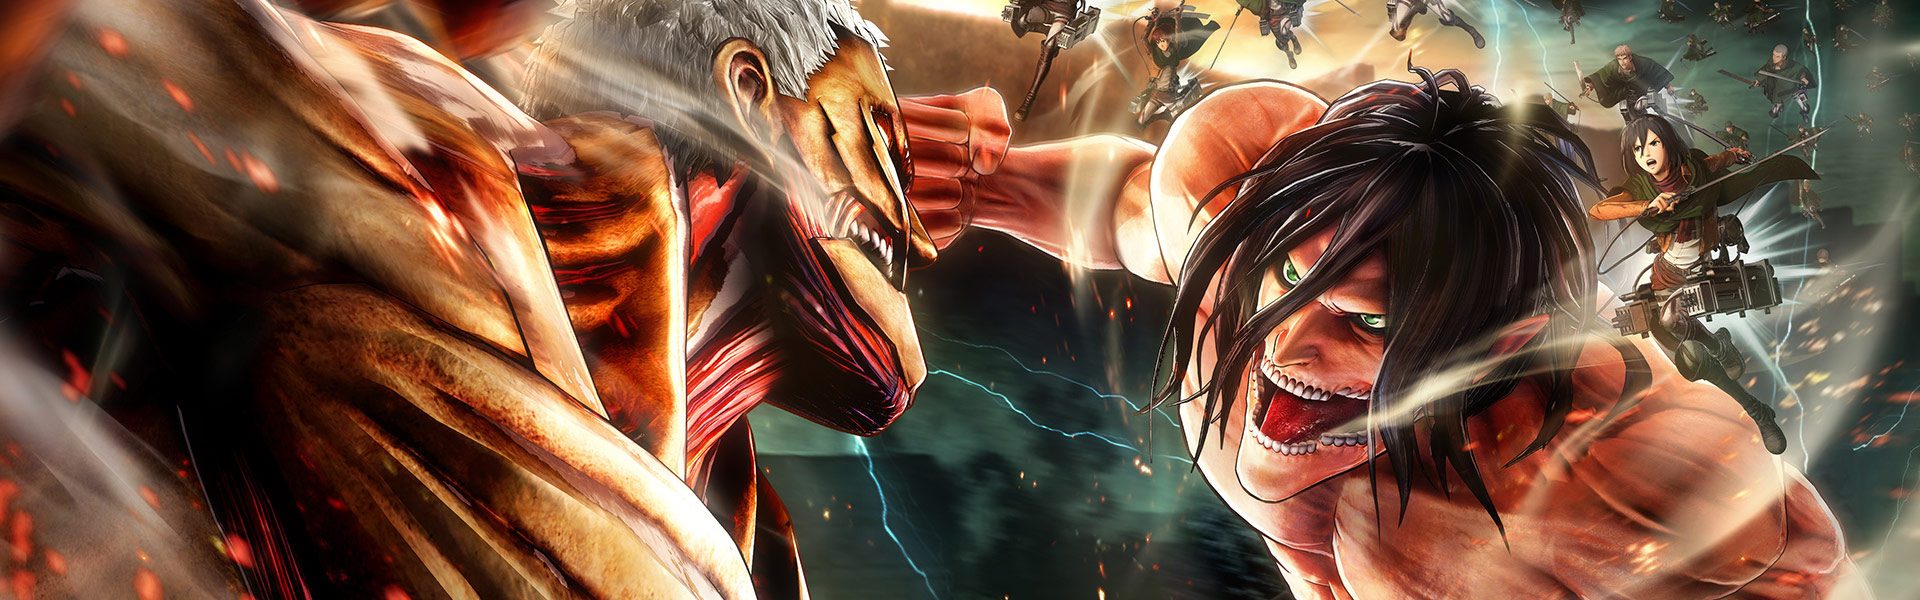 On nackt attack titans Attack on